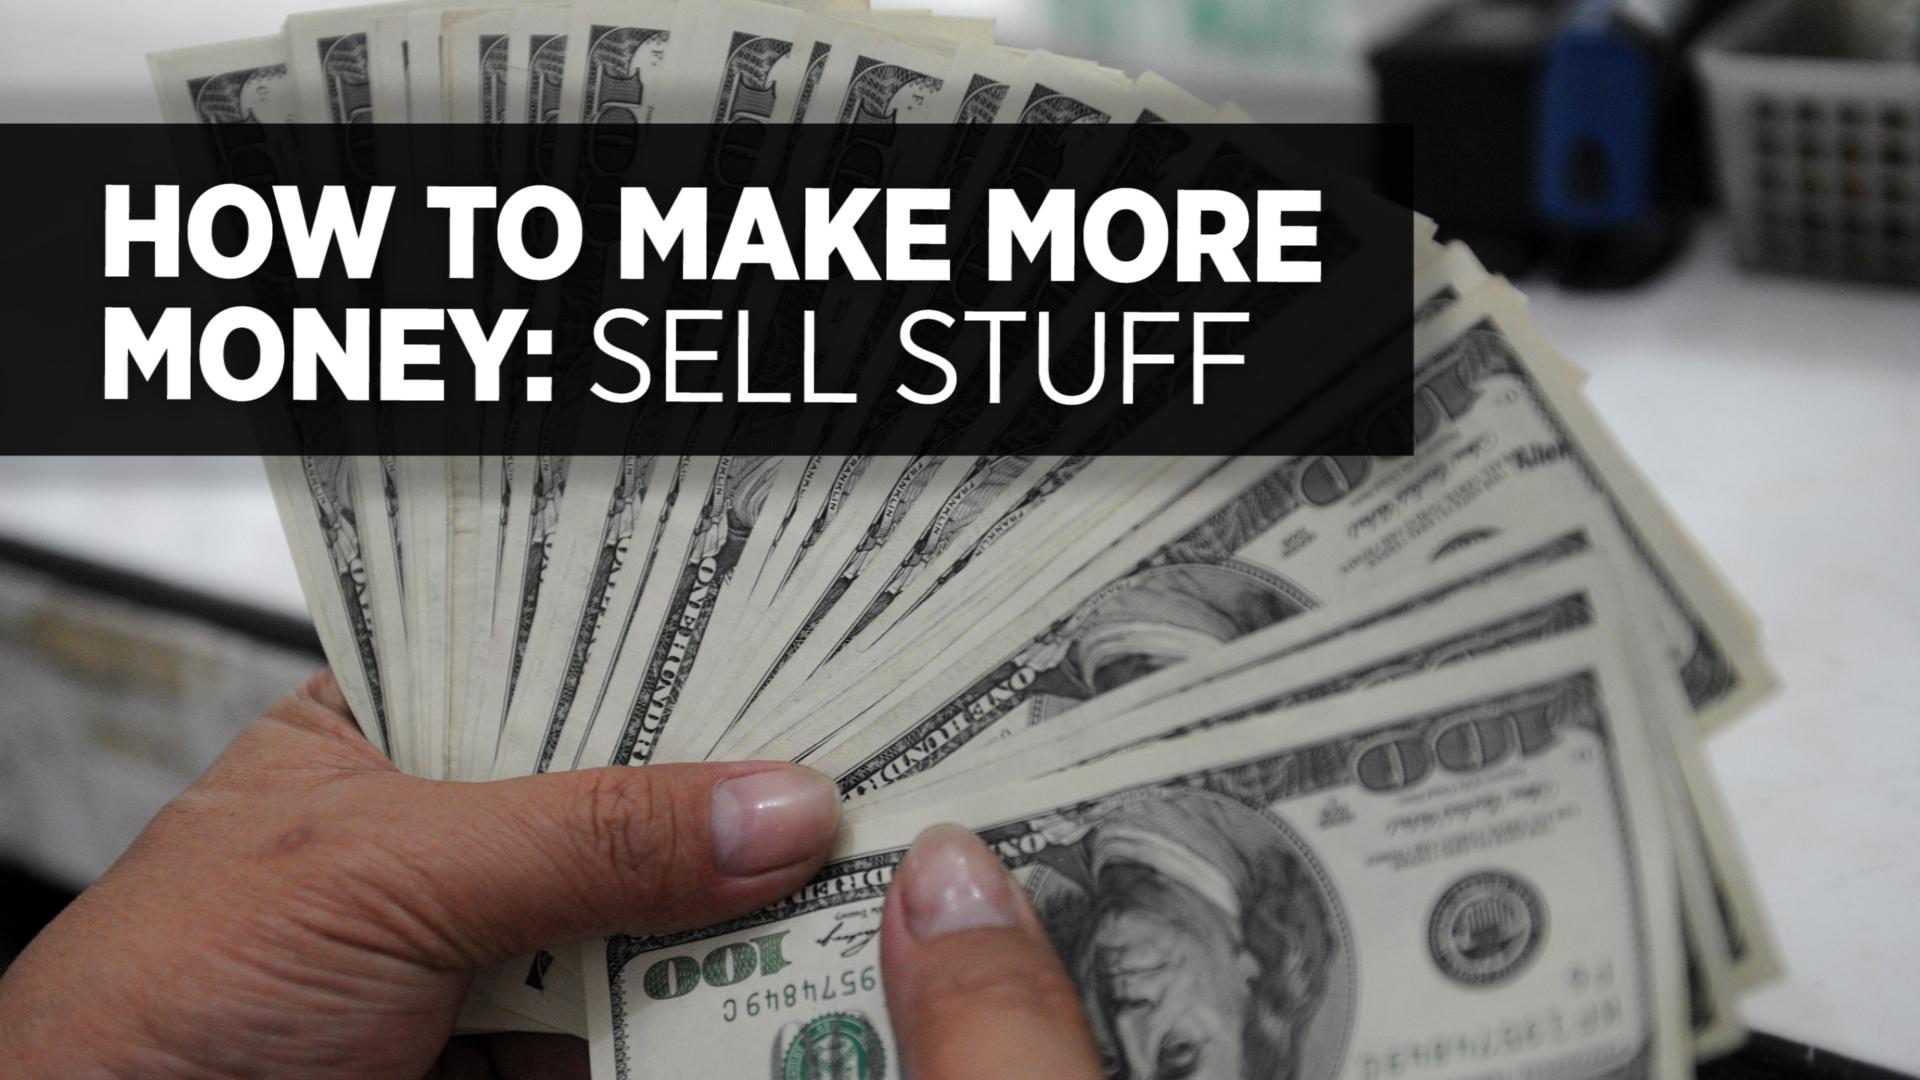 How To Make More Money: Sell Or Rent Stuff